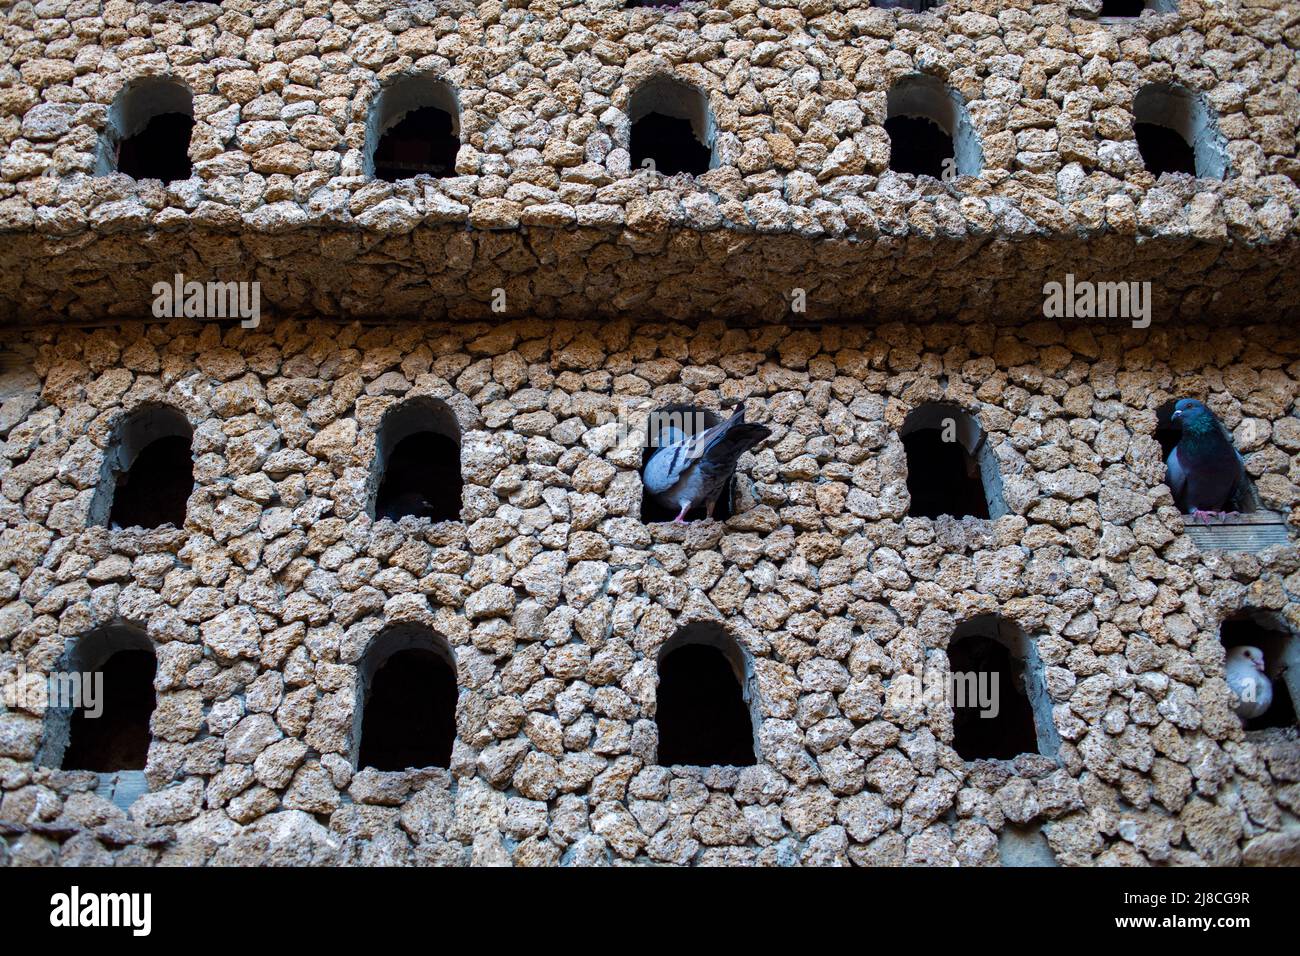 Pigeons in their hiding places in an ancient wall of hercules cave Stock Photo